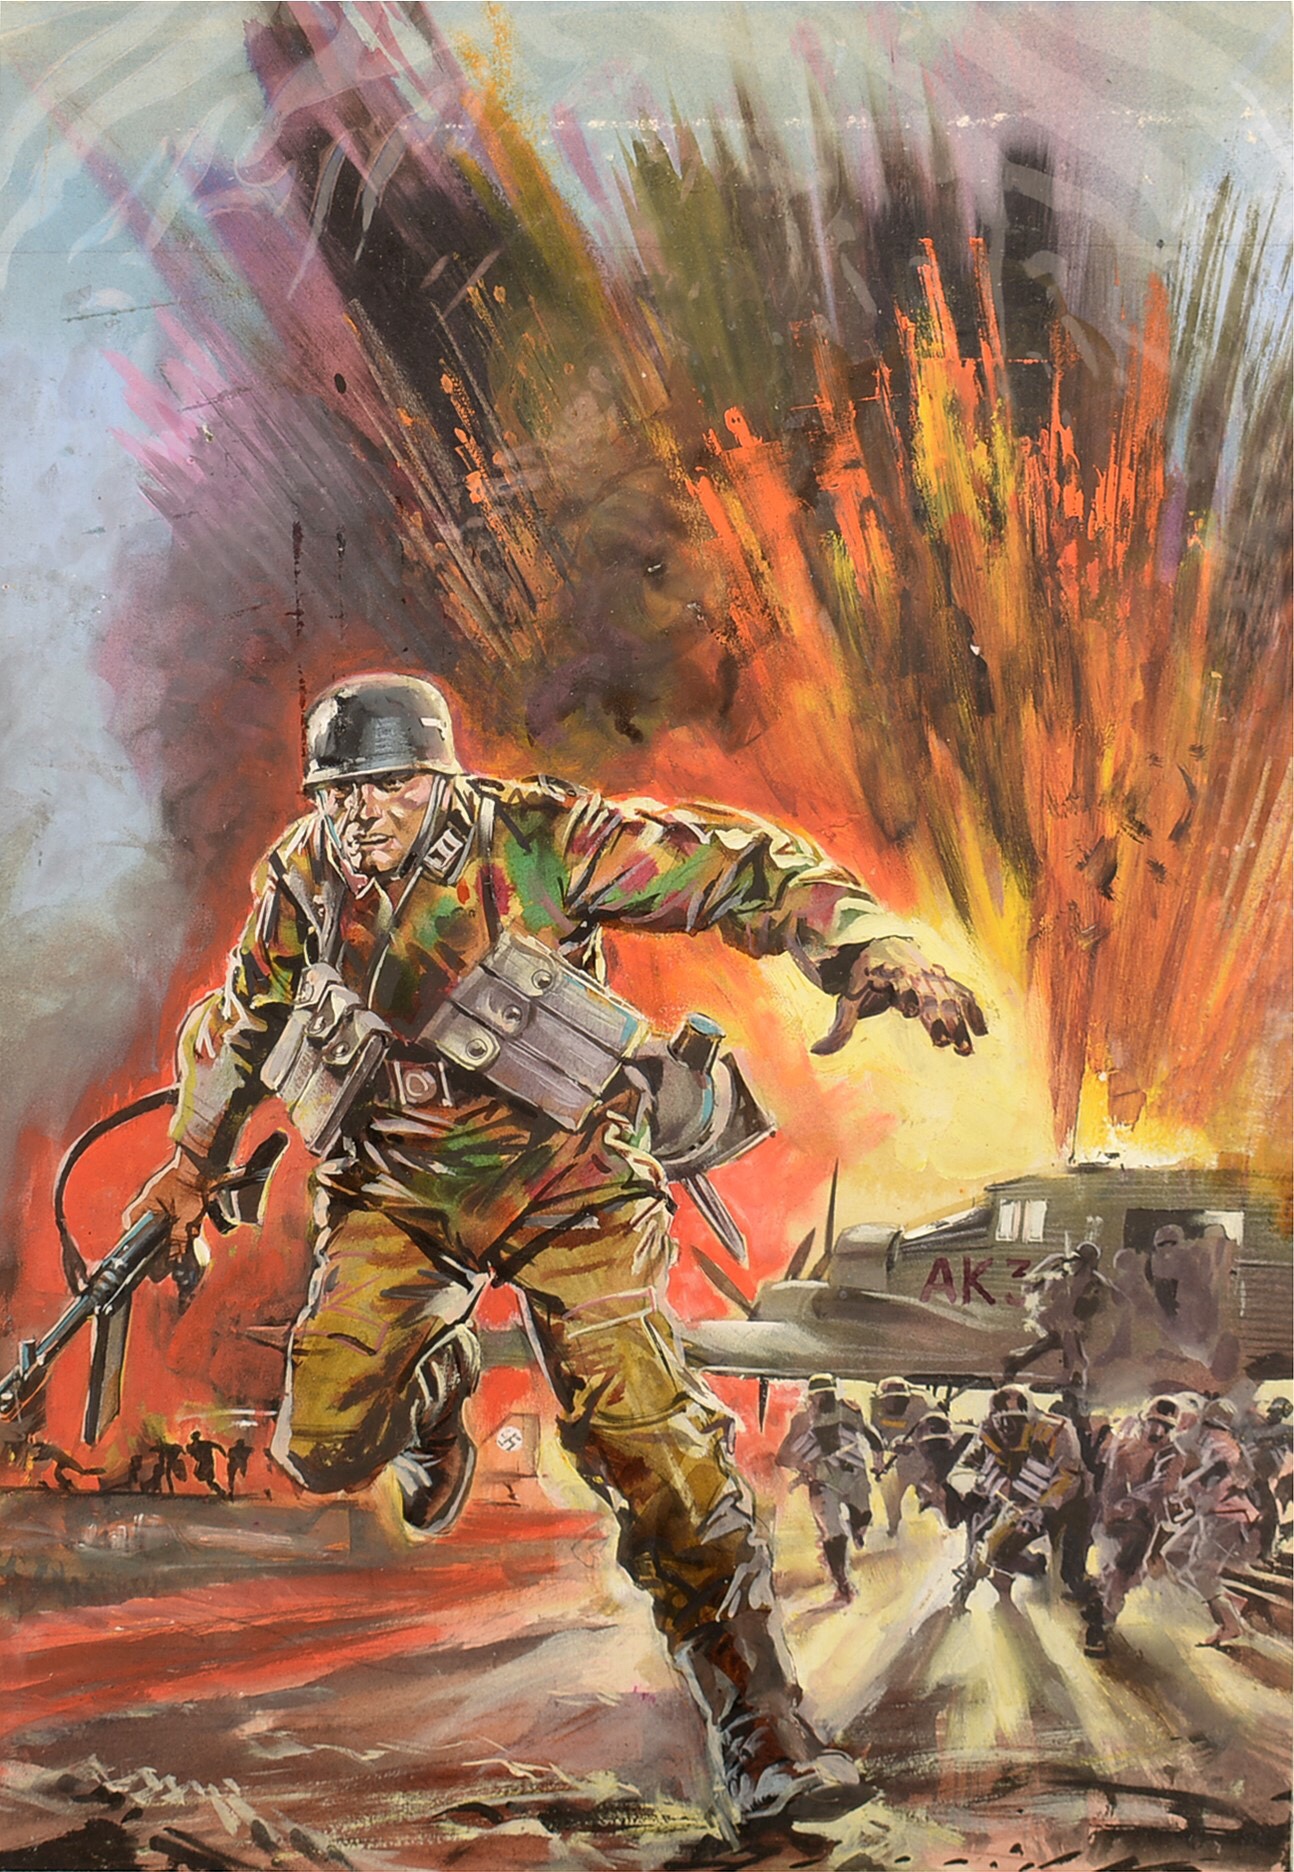 Original Art Work for the front cover of War Picture Library, No. 122 'The Savage Island', by Giorgio de Gaspari, gouache on board, image size 45 x 33cms, unframed, with studio Creazioni D'Ami, Milan, creator's stamp verso, originally published November 1961, subsequently republished as War Picture Library No. 619 ' Flame of Defiance' and War Picture Library, No. 1459. Provenance: The Fleetway Publisher's Archive Collection of Peter Hansen